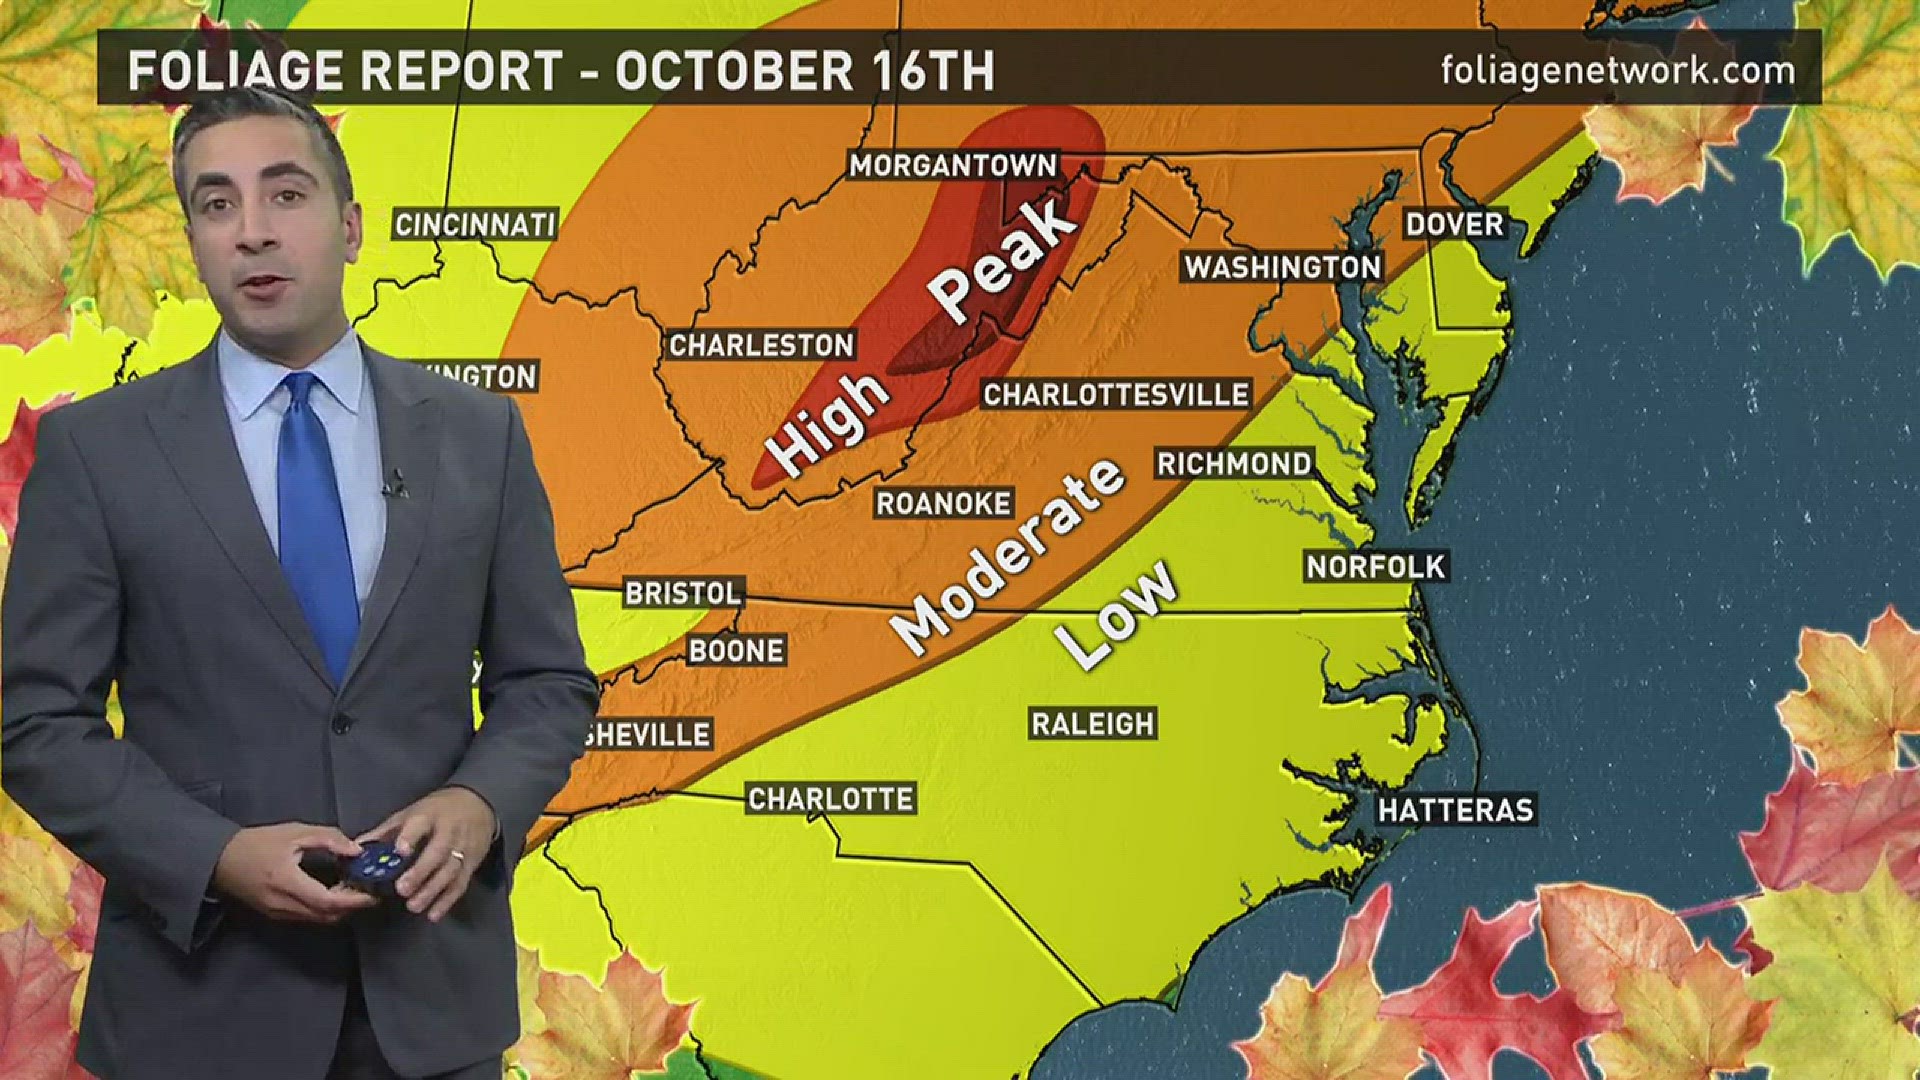 13News Now Meteorologist on the latest forecast of leaves changing color for the Mid-Atlantic.